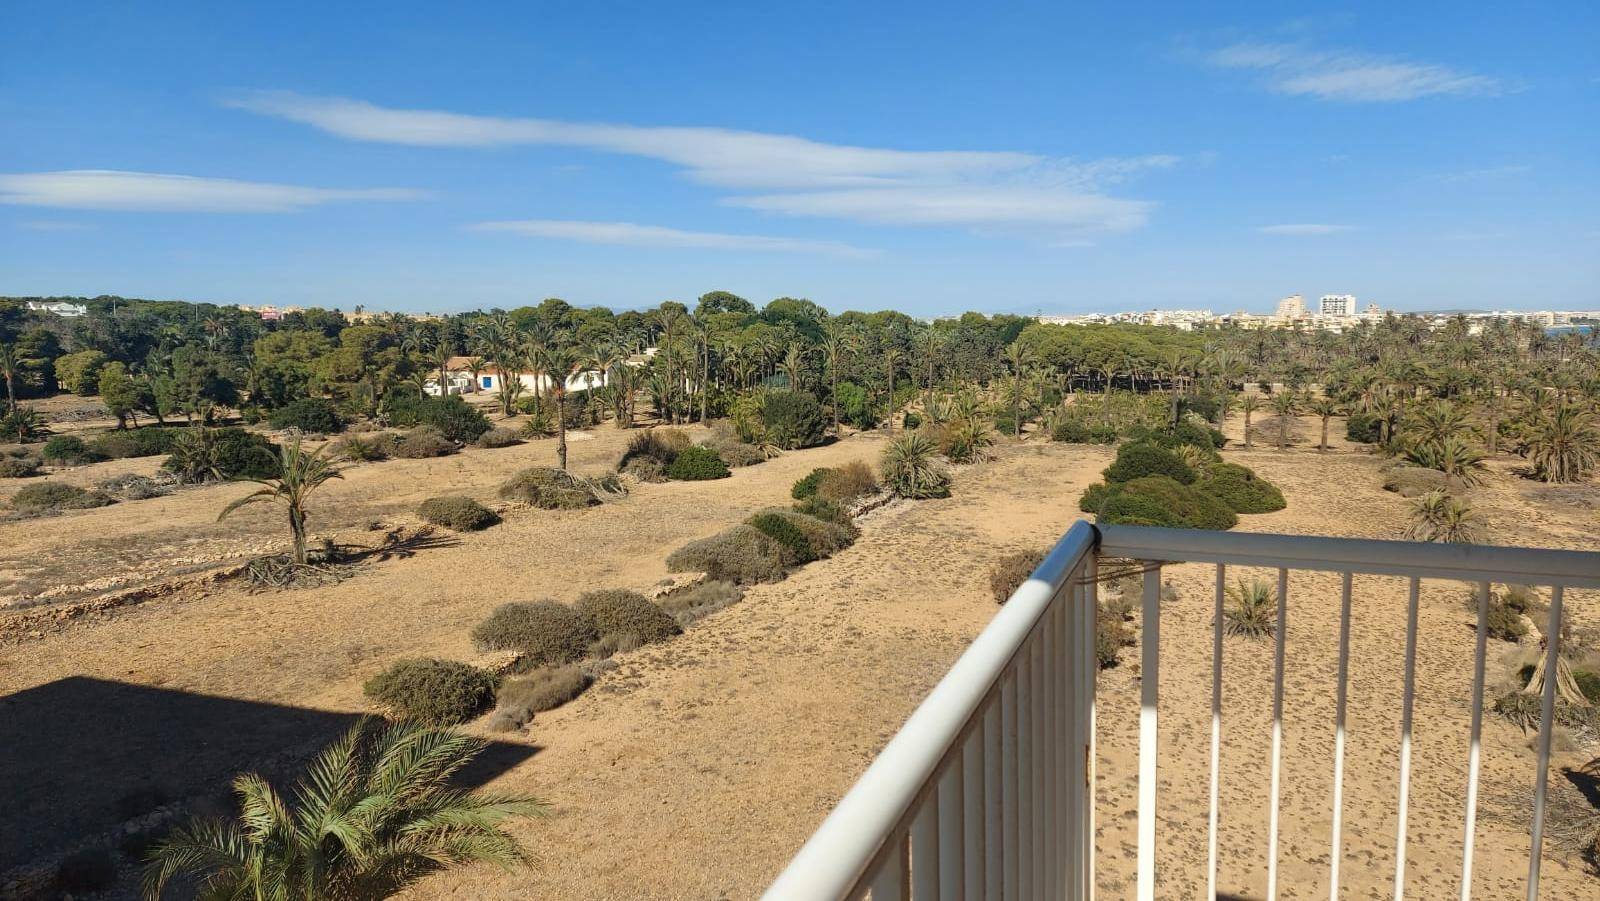 APARTMENT WITH PARKING SPACE AND VIEWS OF THE SEA AND CALA FERRIS IN ROCIO DEL MAR